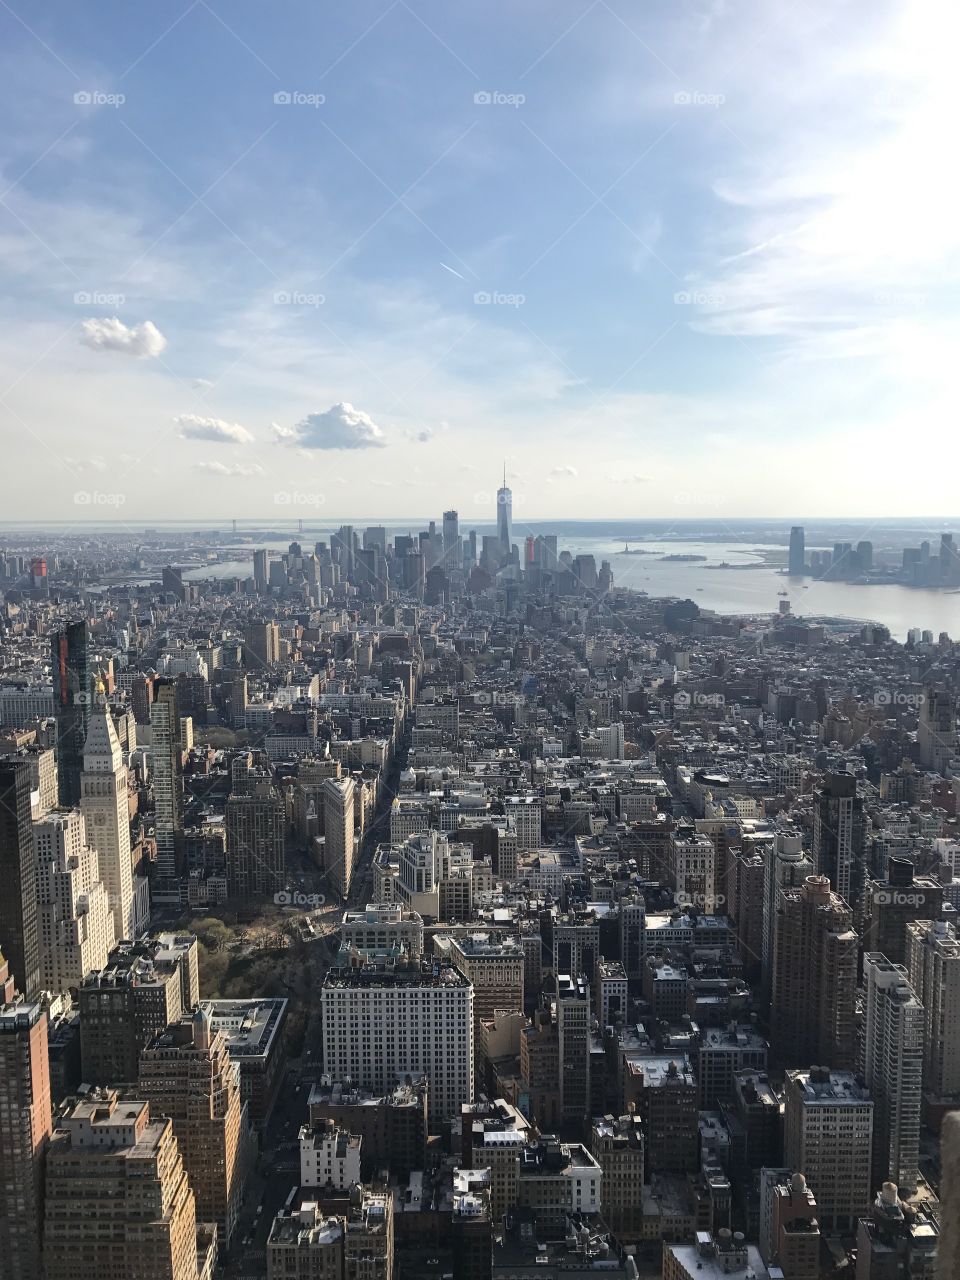 Empire State Building, view from the top